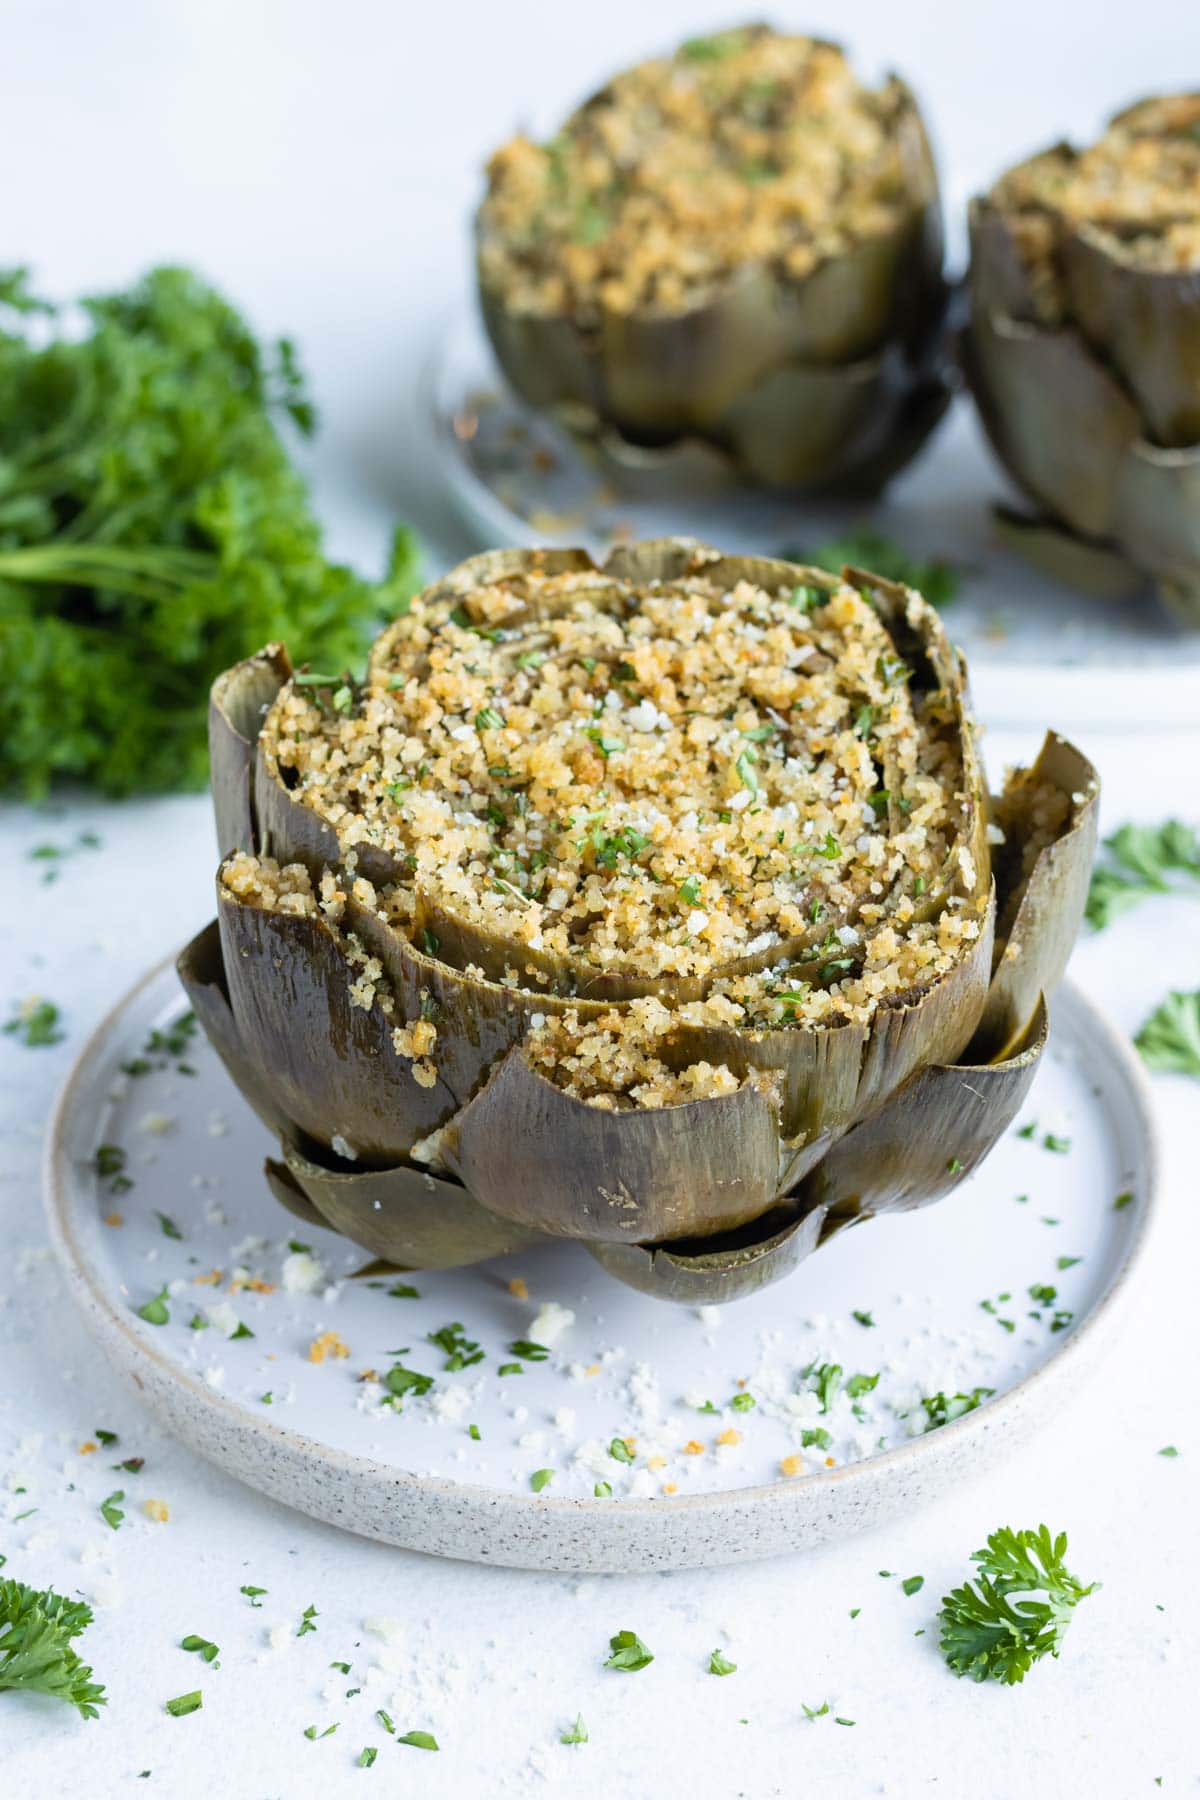 Easy stuffed artichokes are served on a white plate.